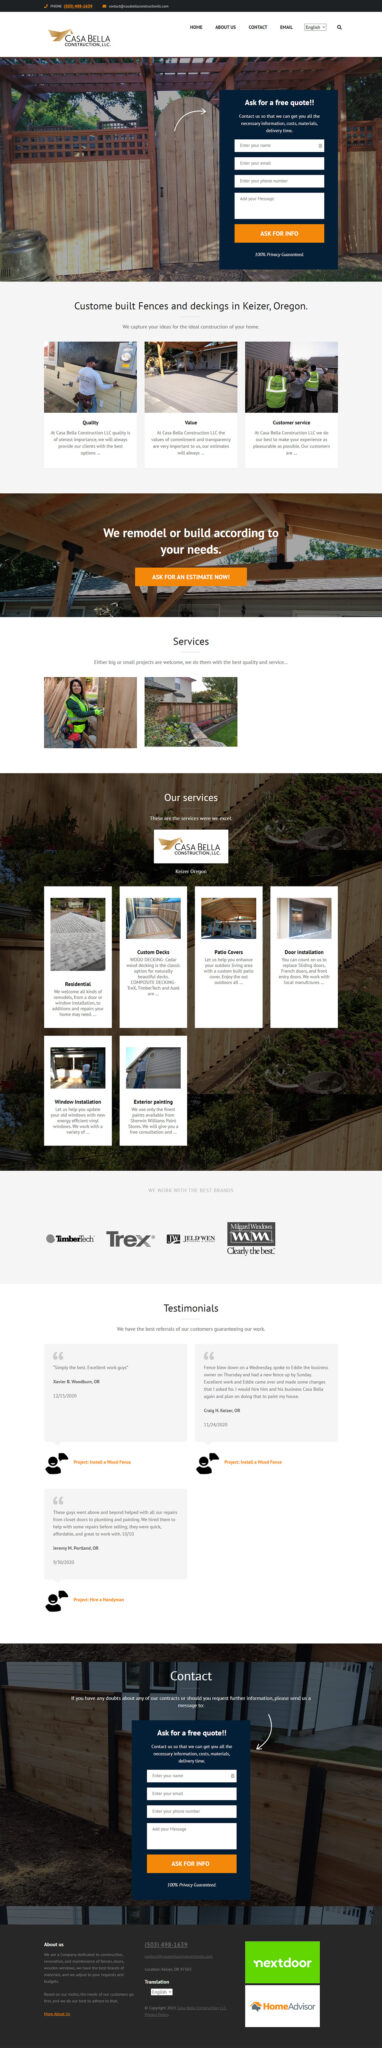 Casa Bella Construction Home page before redesign